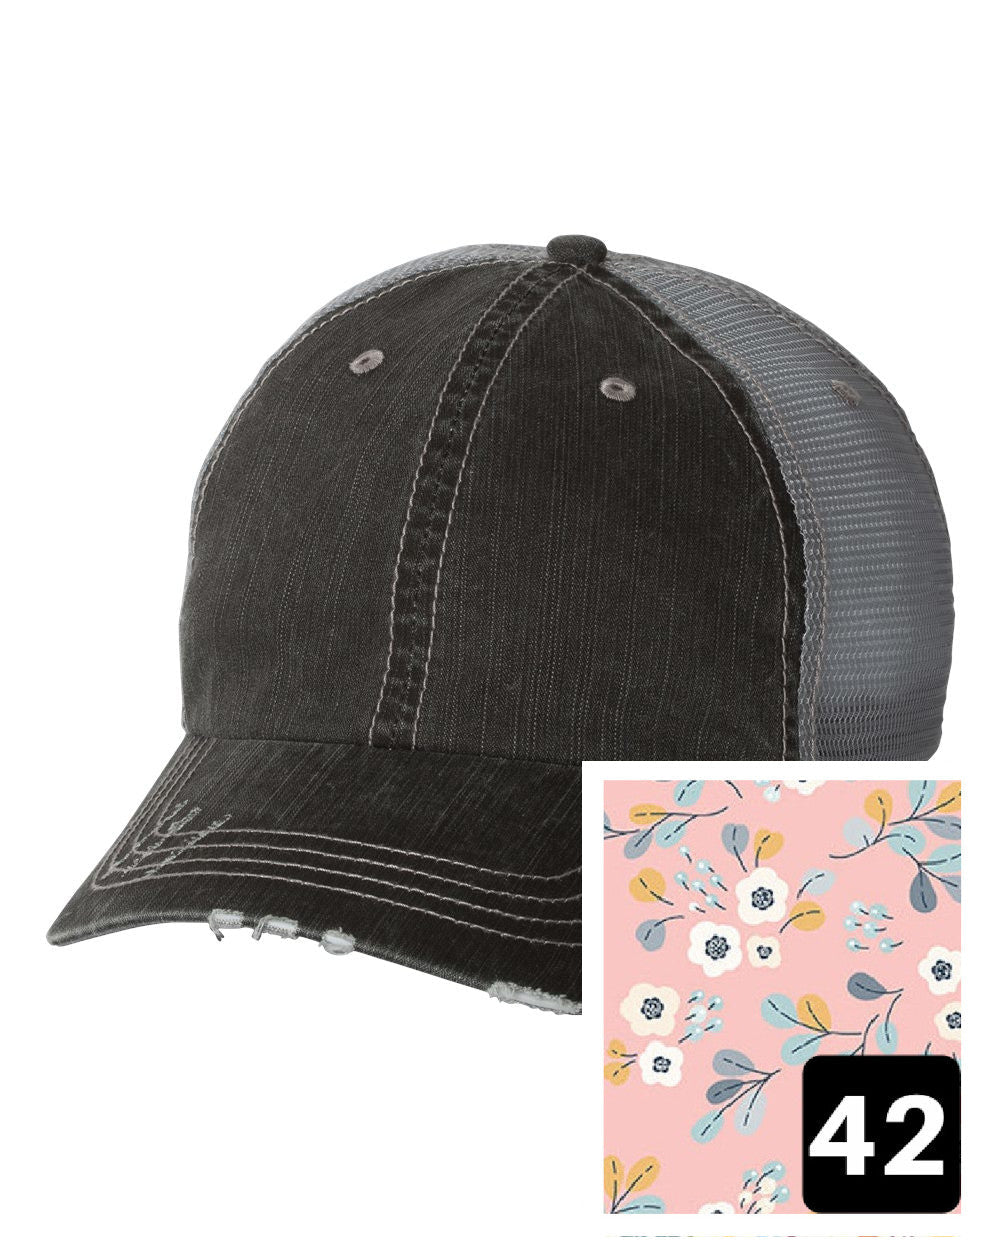 gray distressed trucker hat with light blue and pink mosaic fabric state of Rhode Island